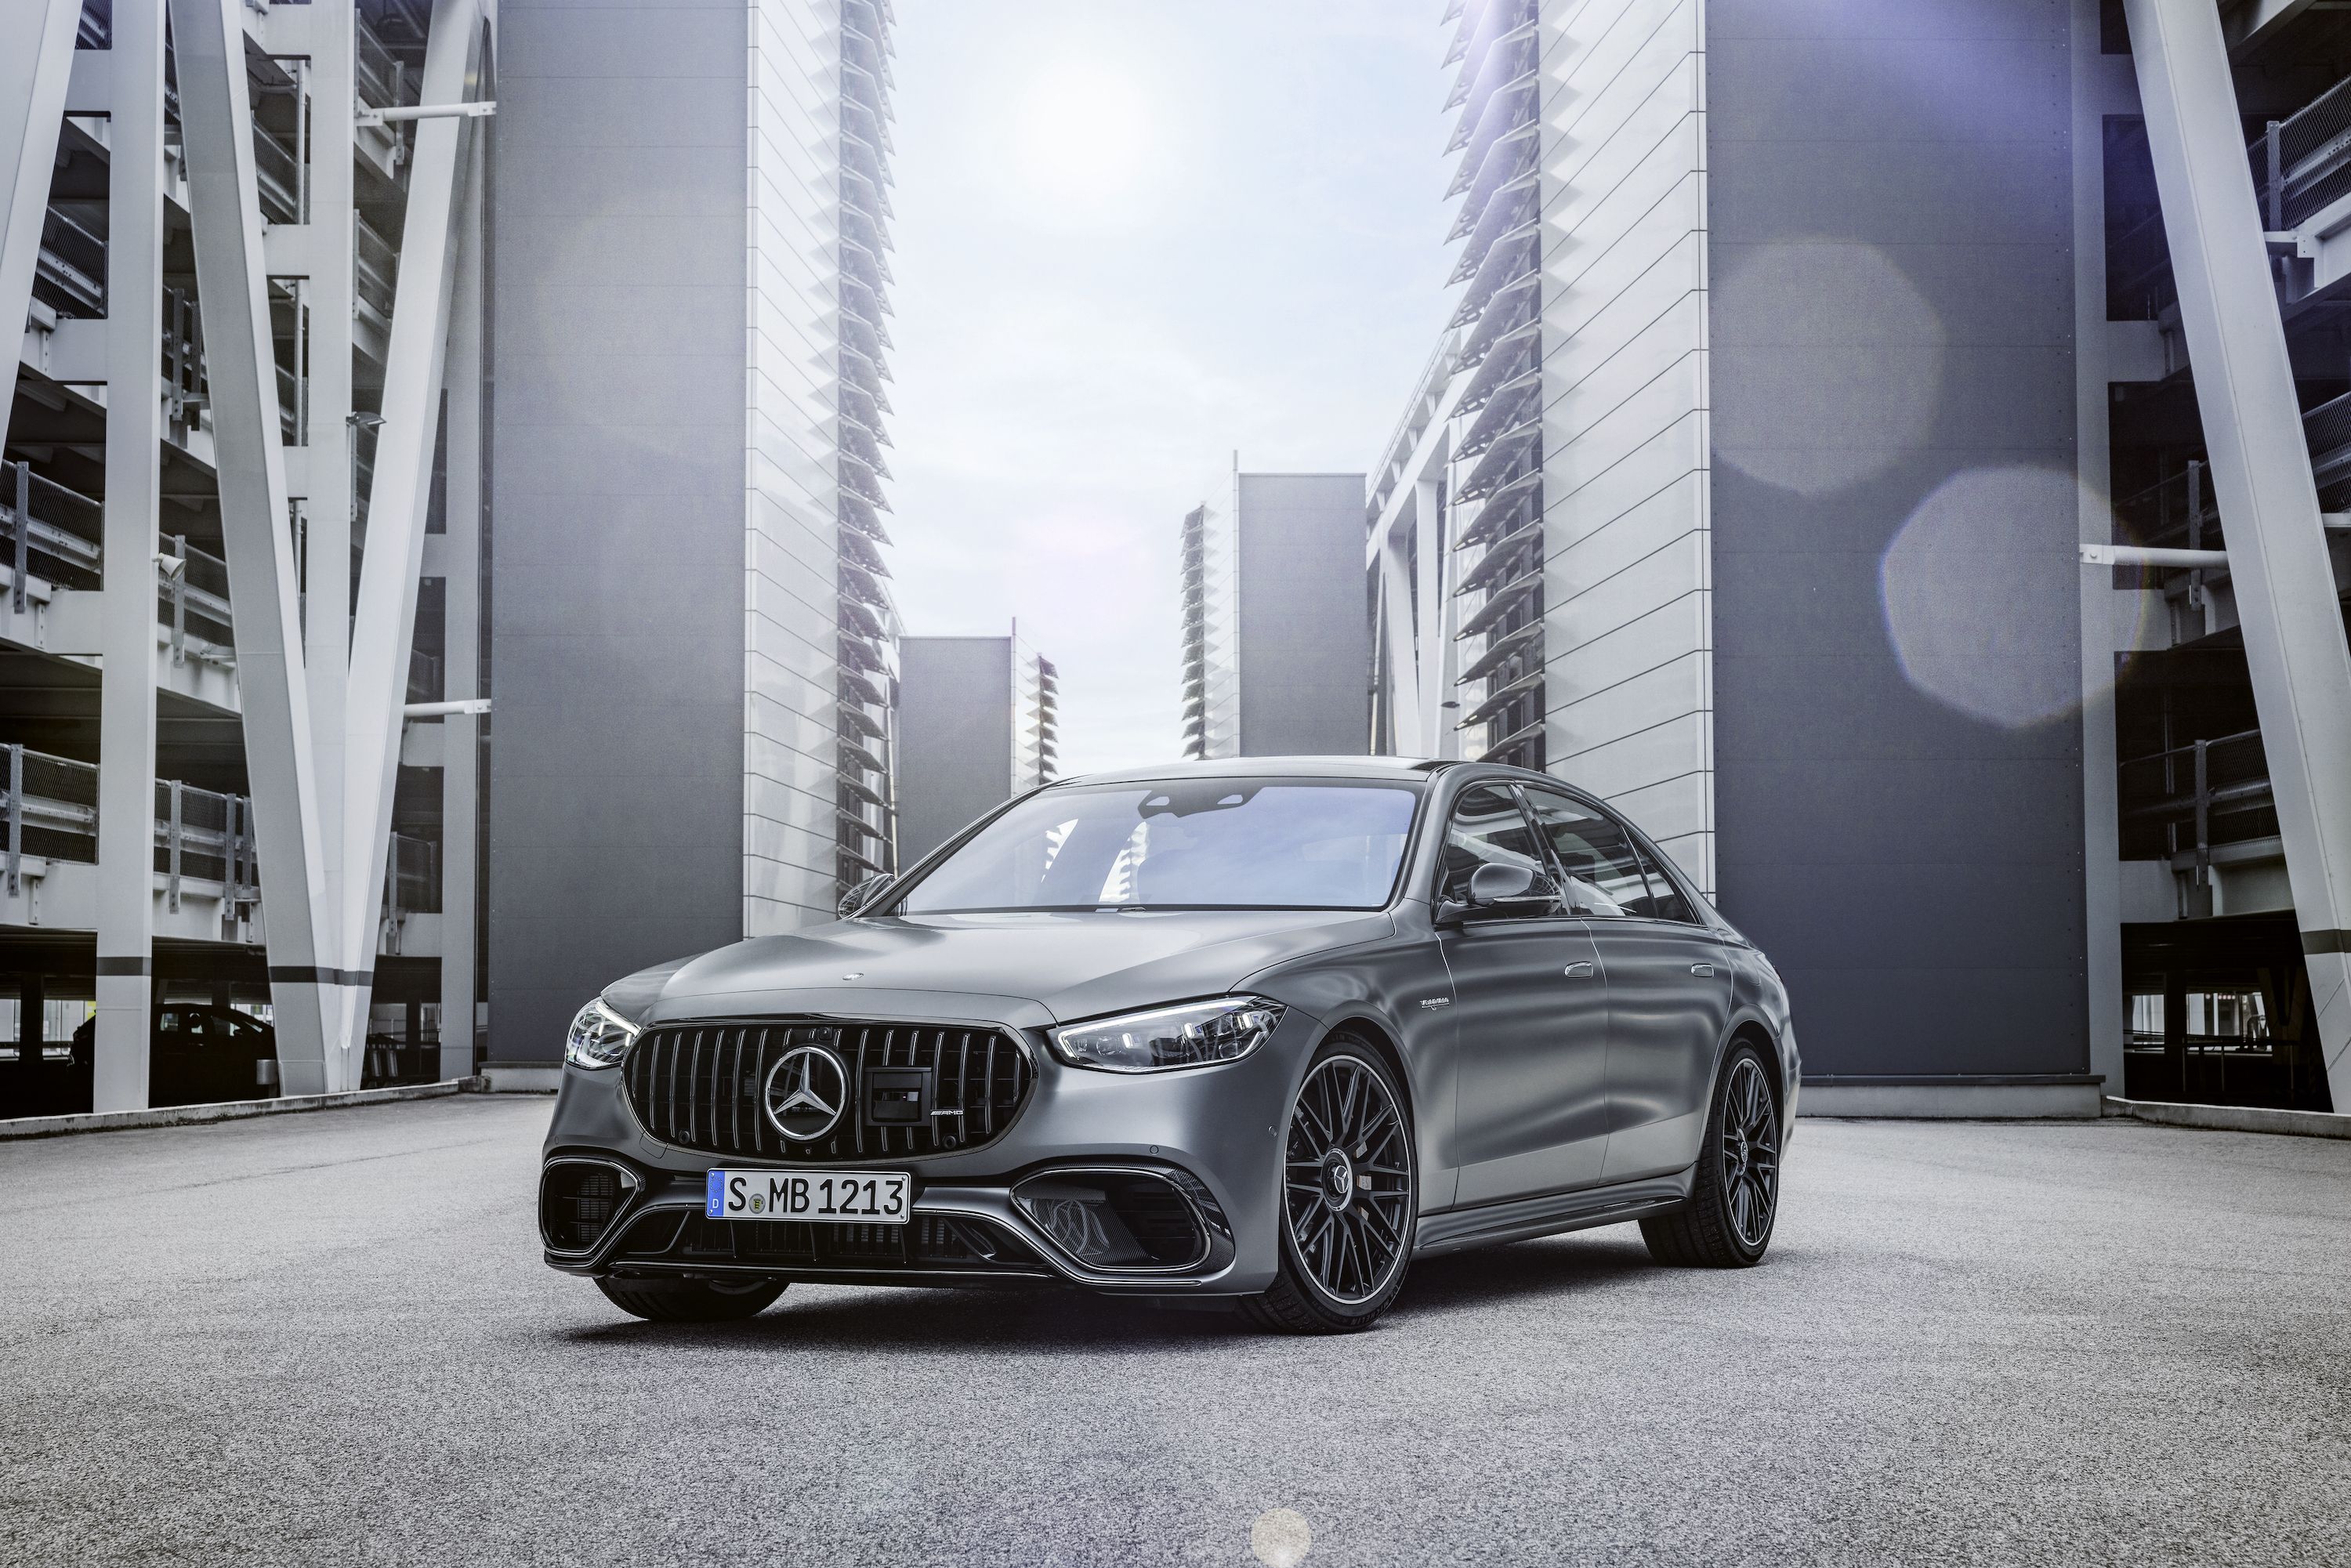 Mercedes-AMG C63 S E-Performance: AMG's New C63 Is a 671-HP PHEV